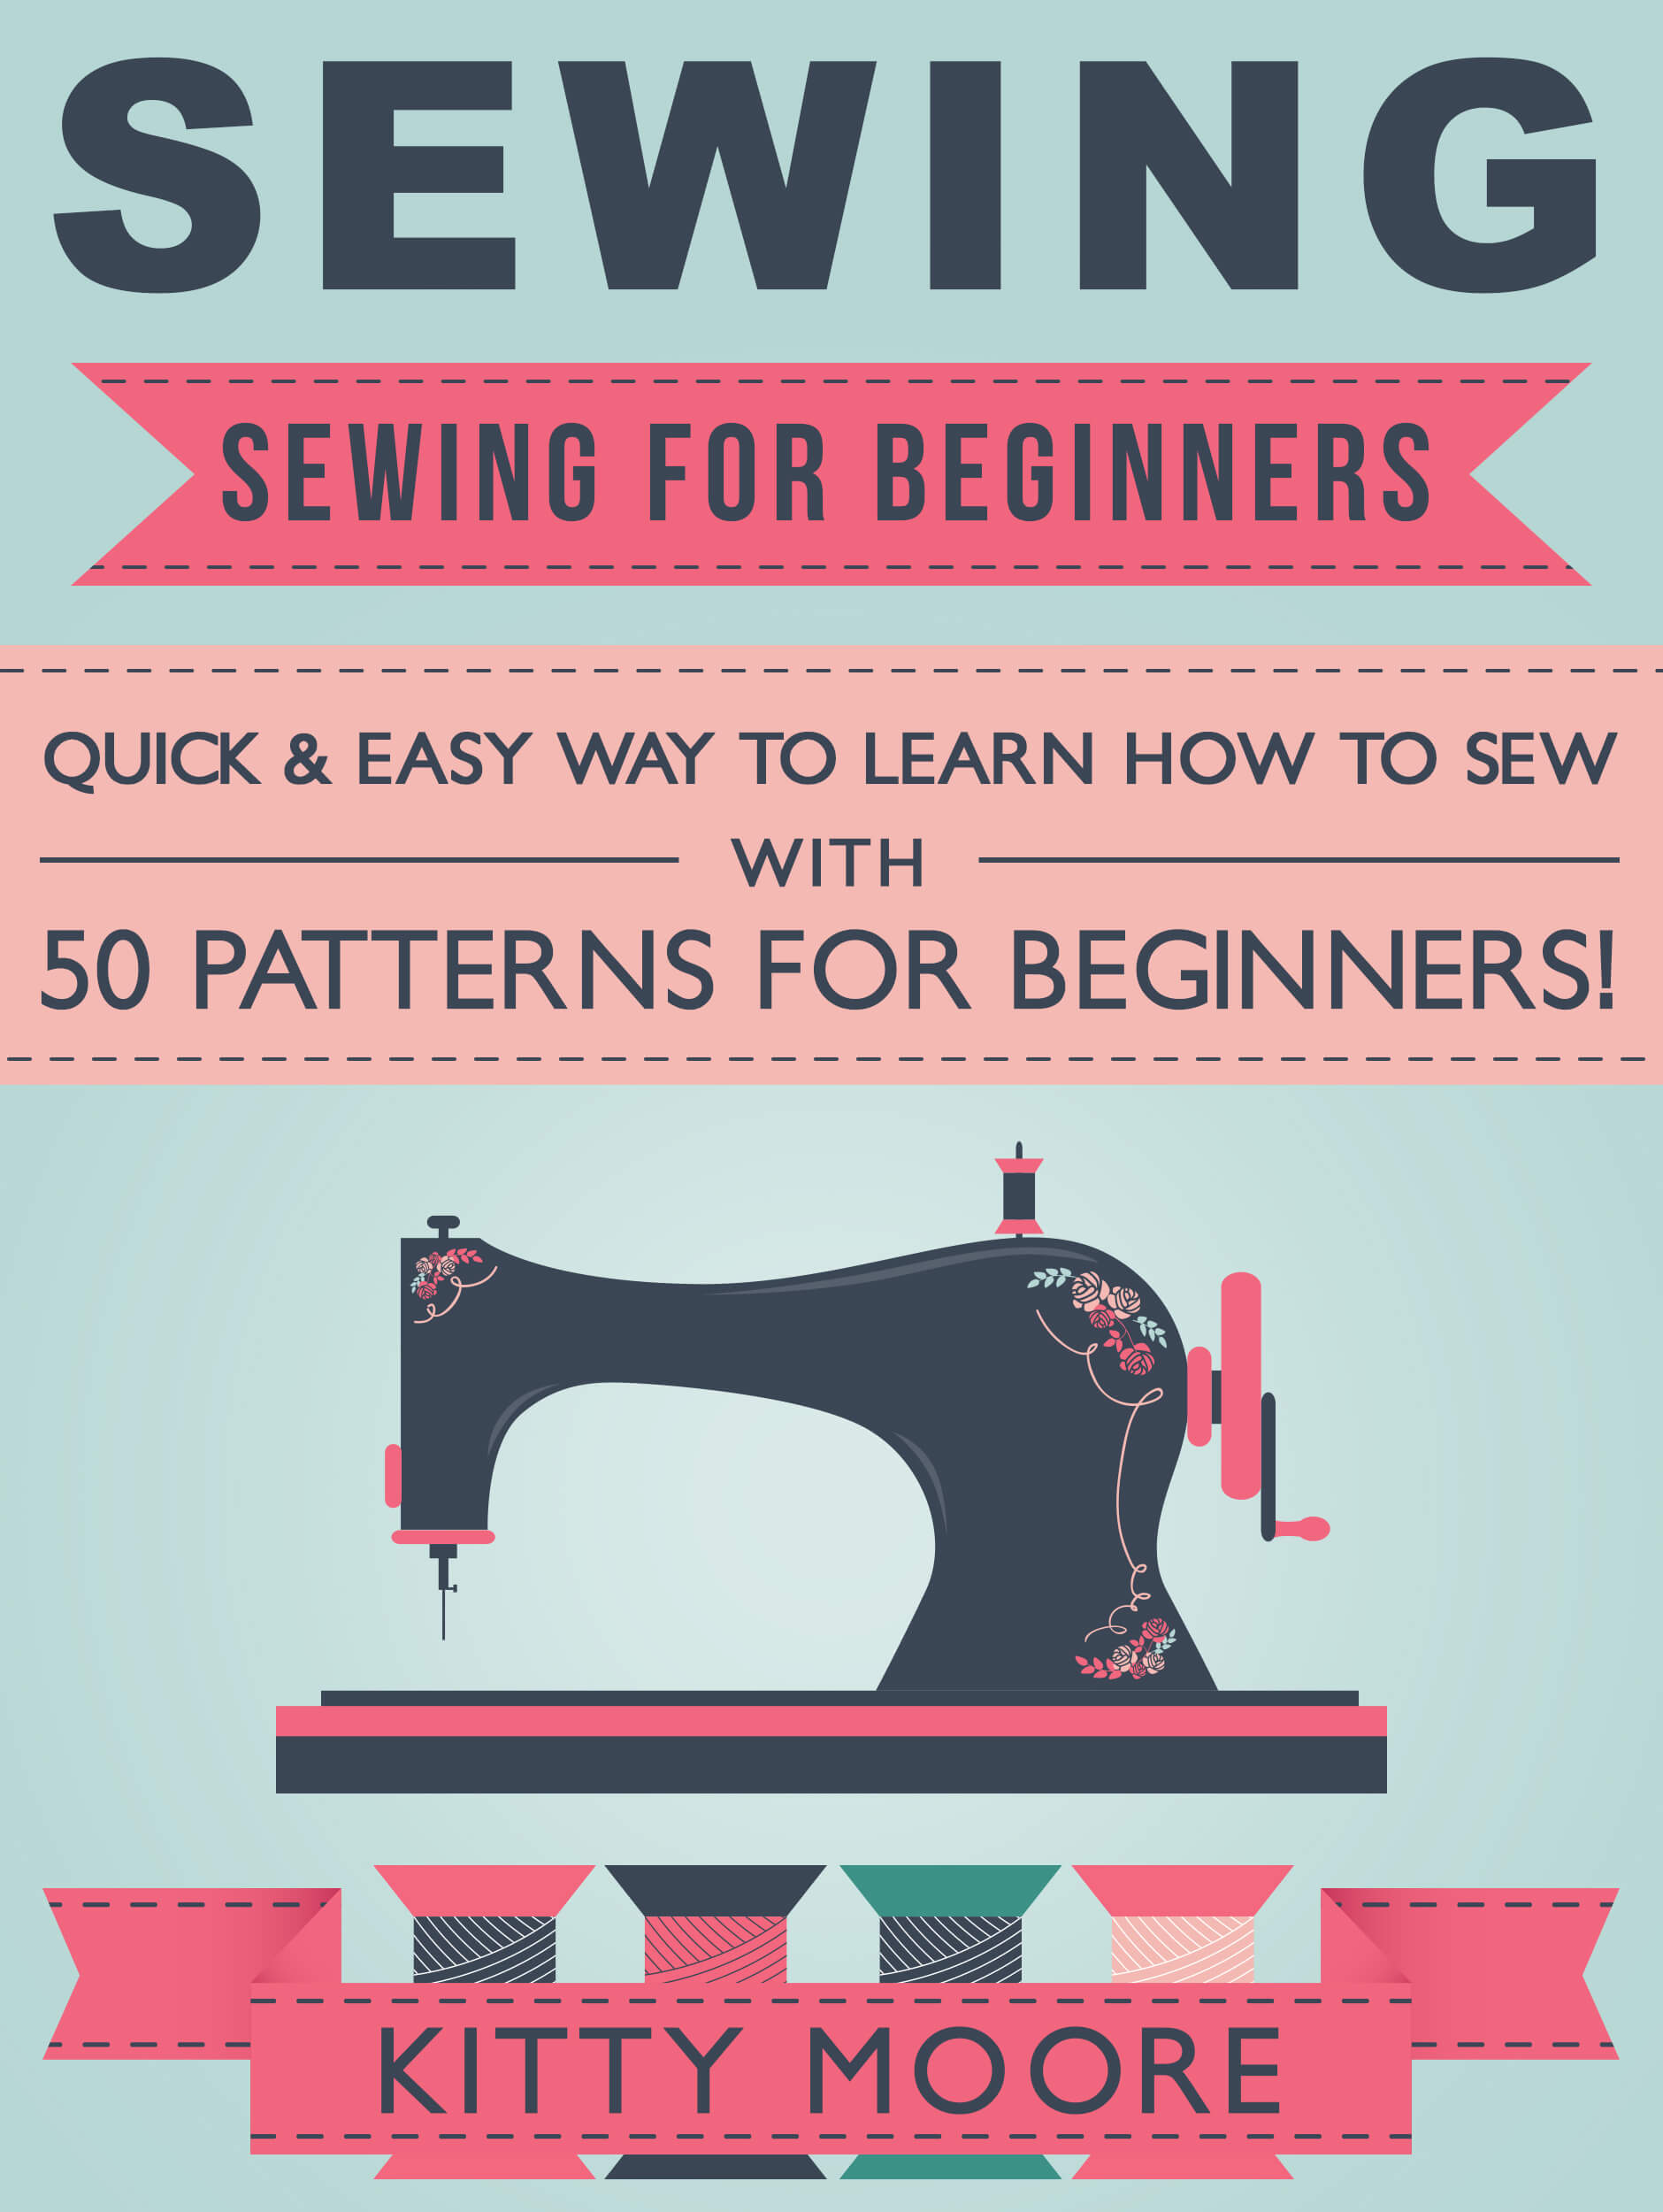 FREE: Sewing (5th Edition): Sewing For Beginners – Quick & Easy Way To Learn How To Sew With 50 Patterns for Beginners! by Kitty Moore